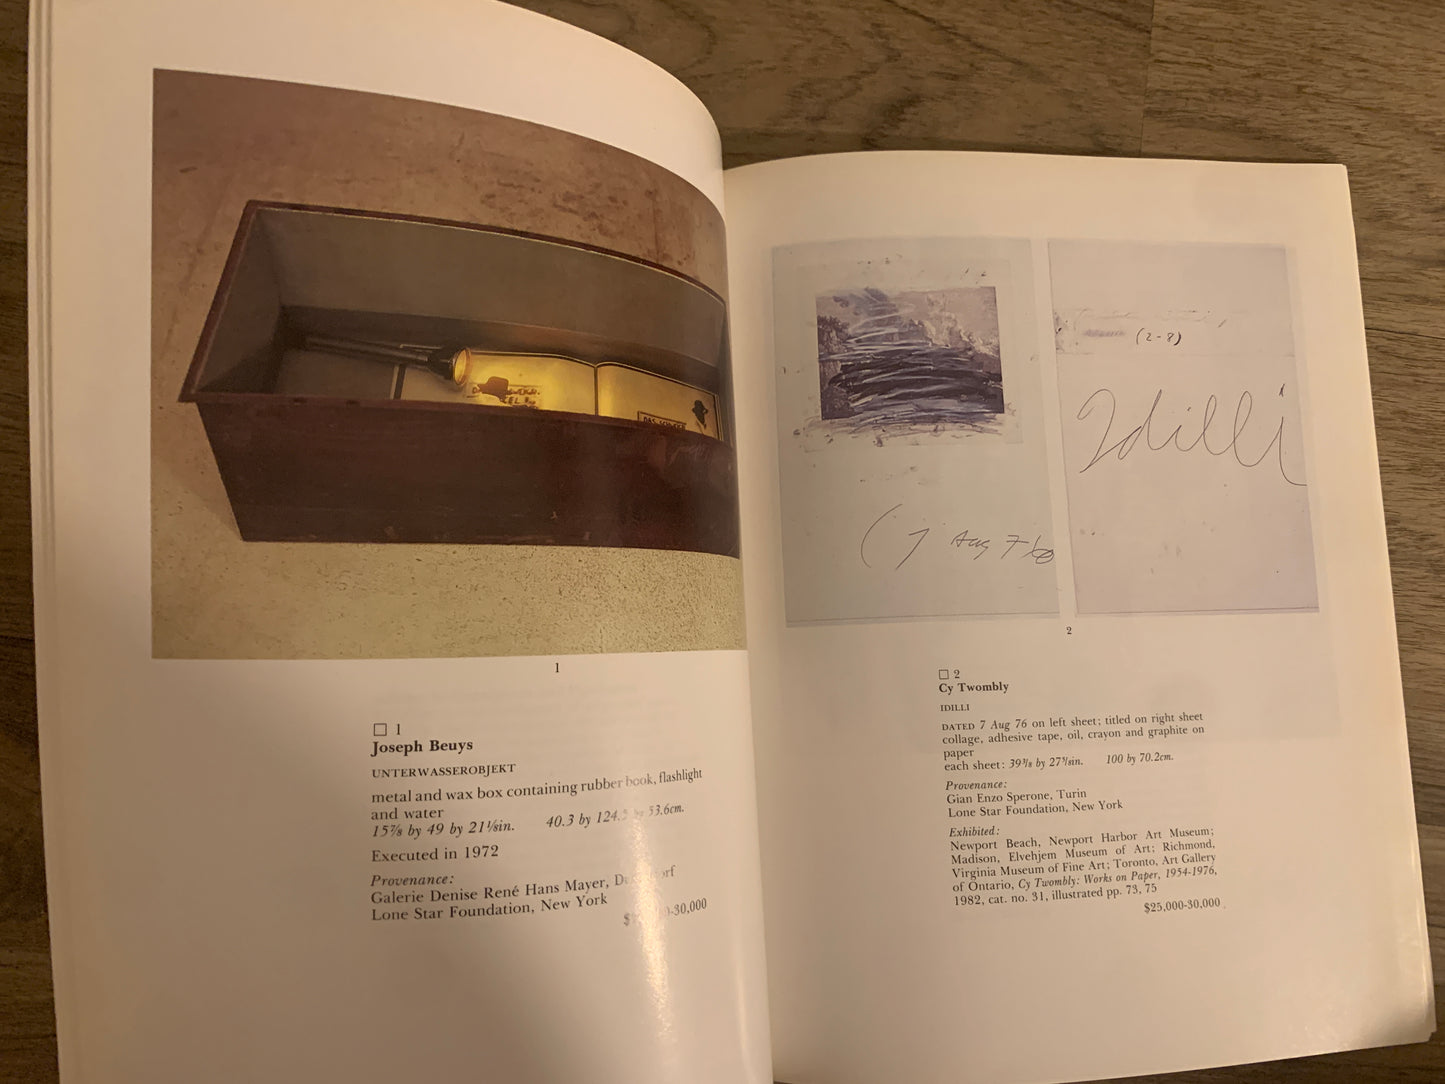 Sotheby's 23 Works from the Dia Art Foundation, Tuesday, November 5, 1985